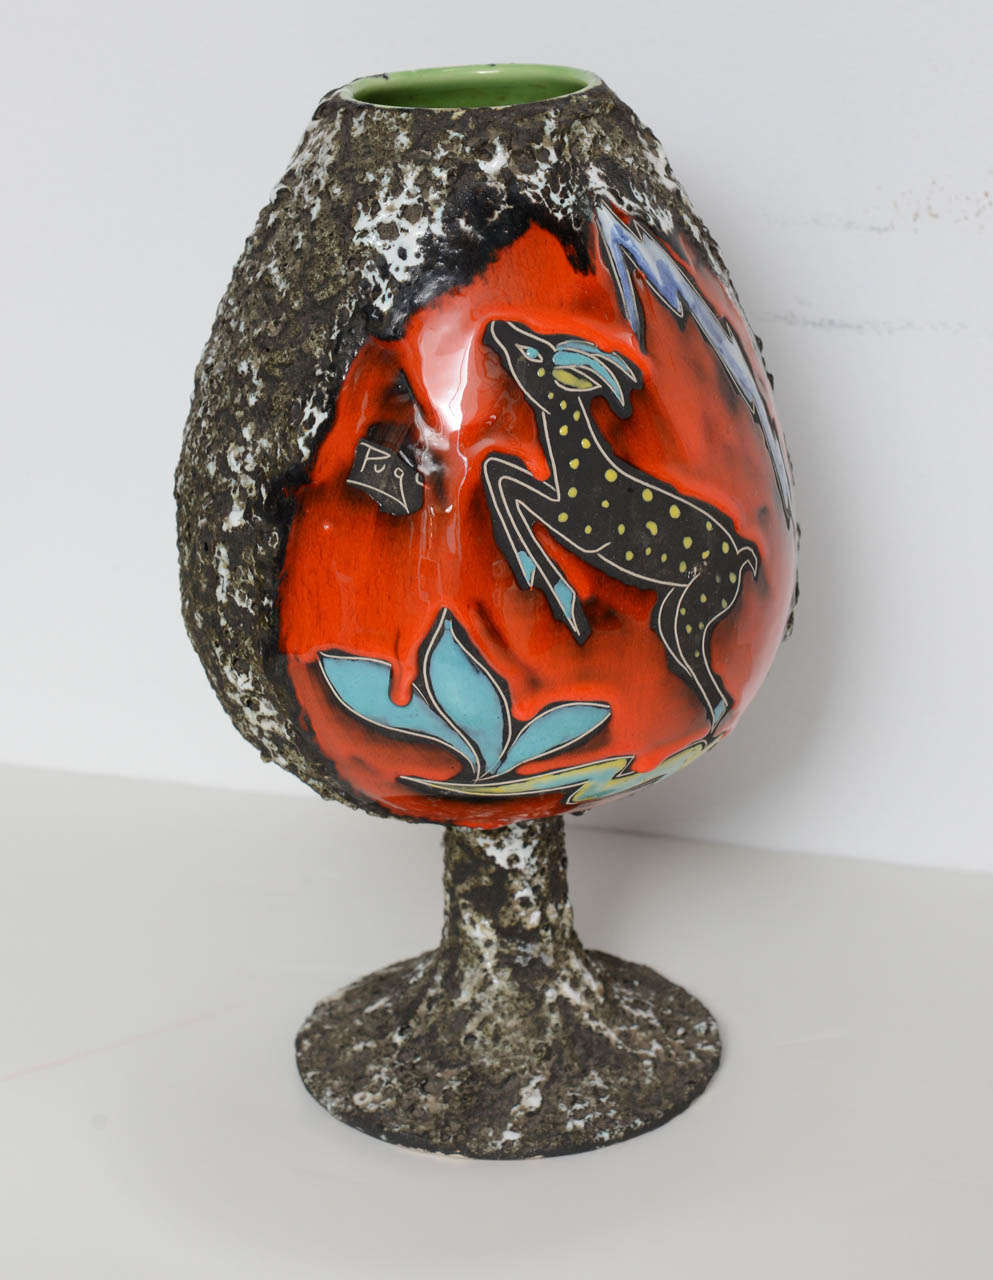 From the well-known house of ceramic work Pugi in Monaco comes this textural and colorful chalice piece.  Coloring and style clearly reflect 1960s design.  Piece features a deer leaping over grass with a mountain at its back, and leaves on its